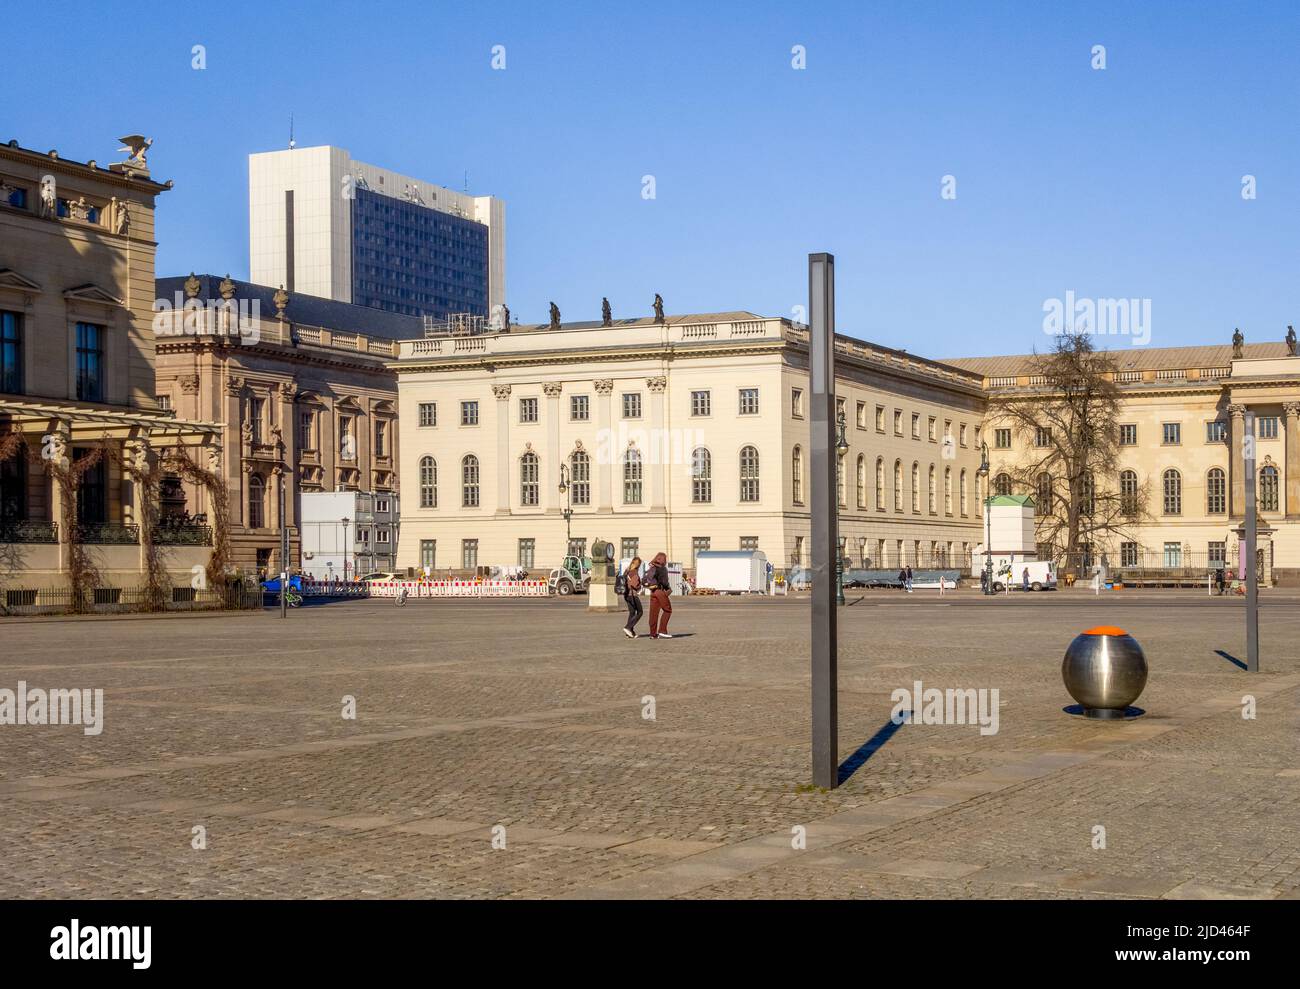 Scenery around the Humboldt University of Berlin, the capital and largest city in Germany Stock Photo